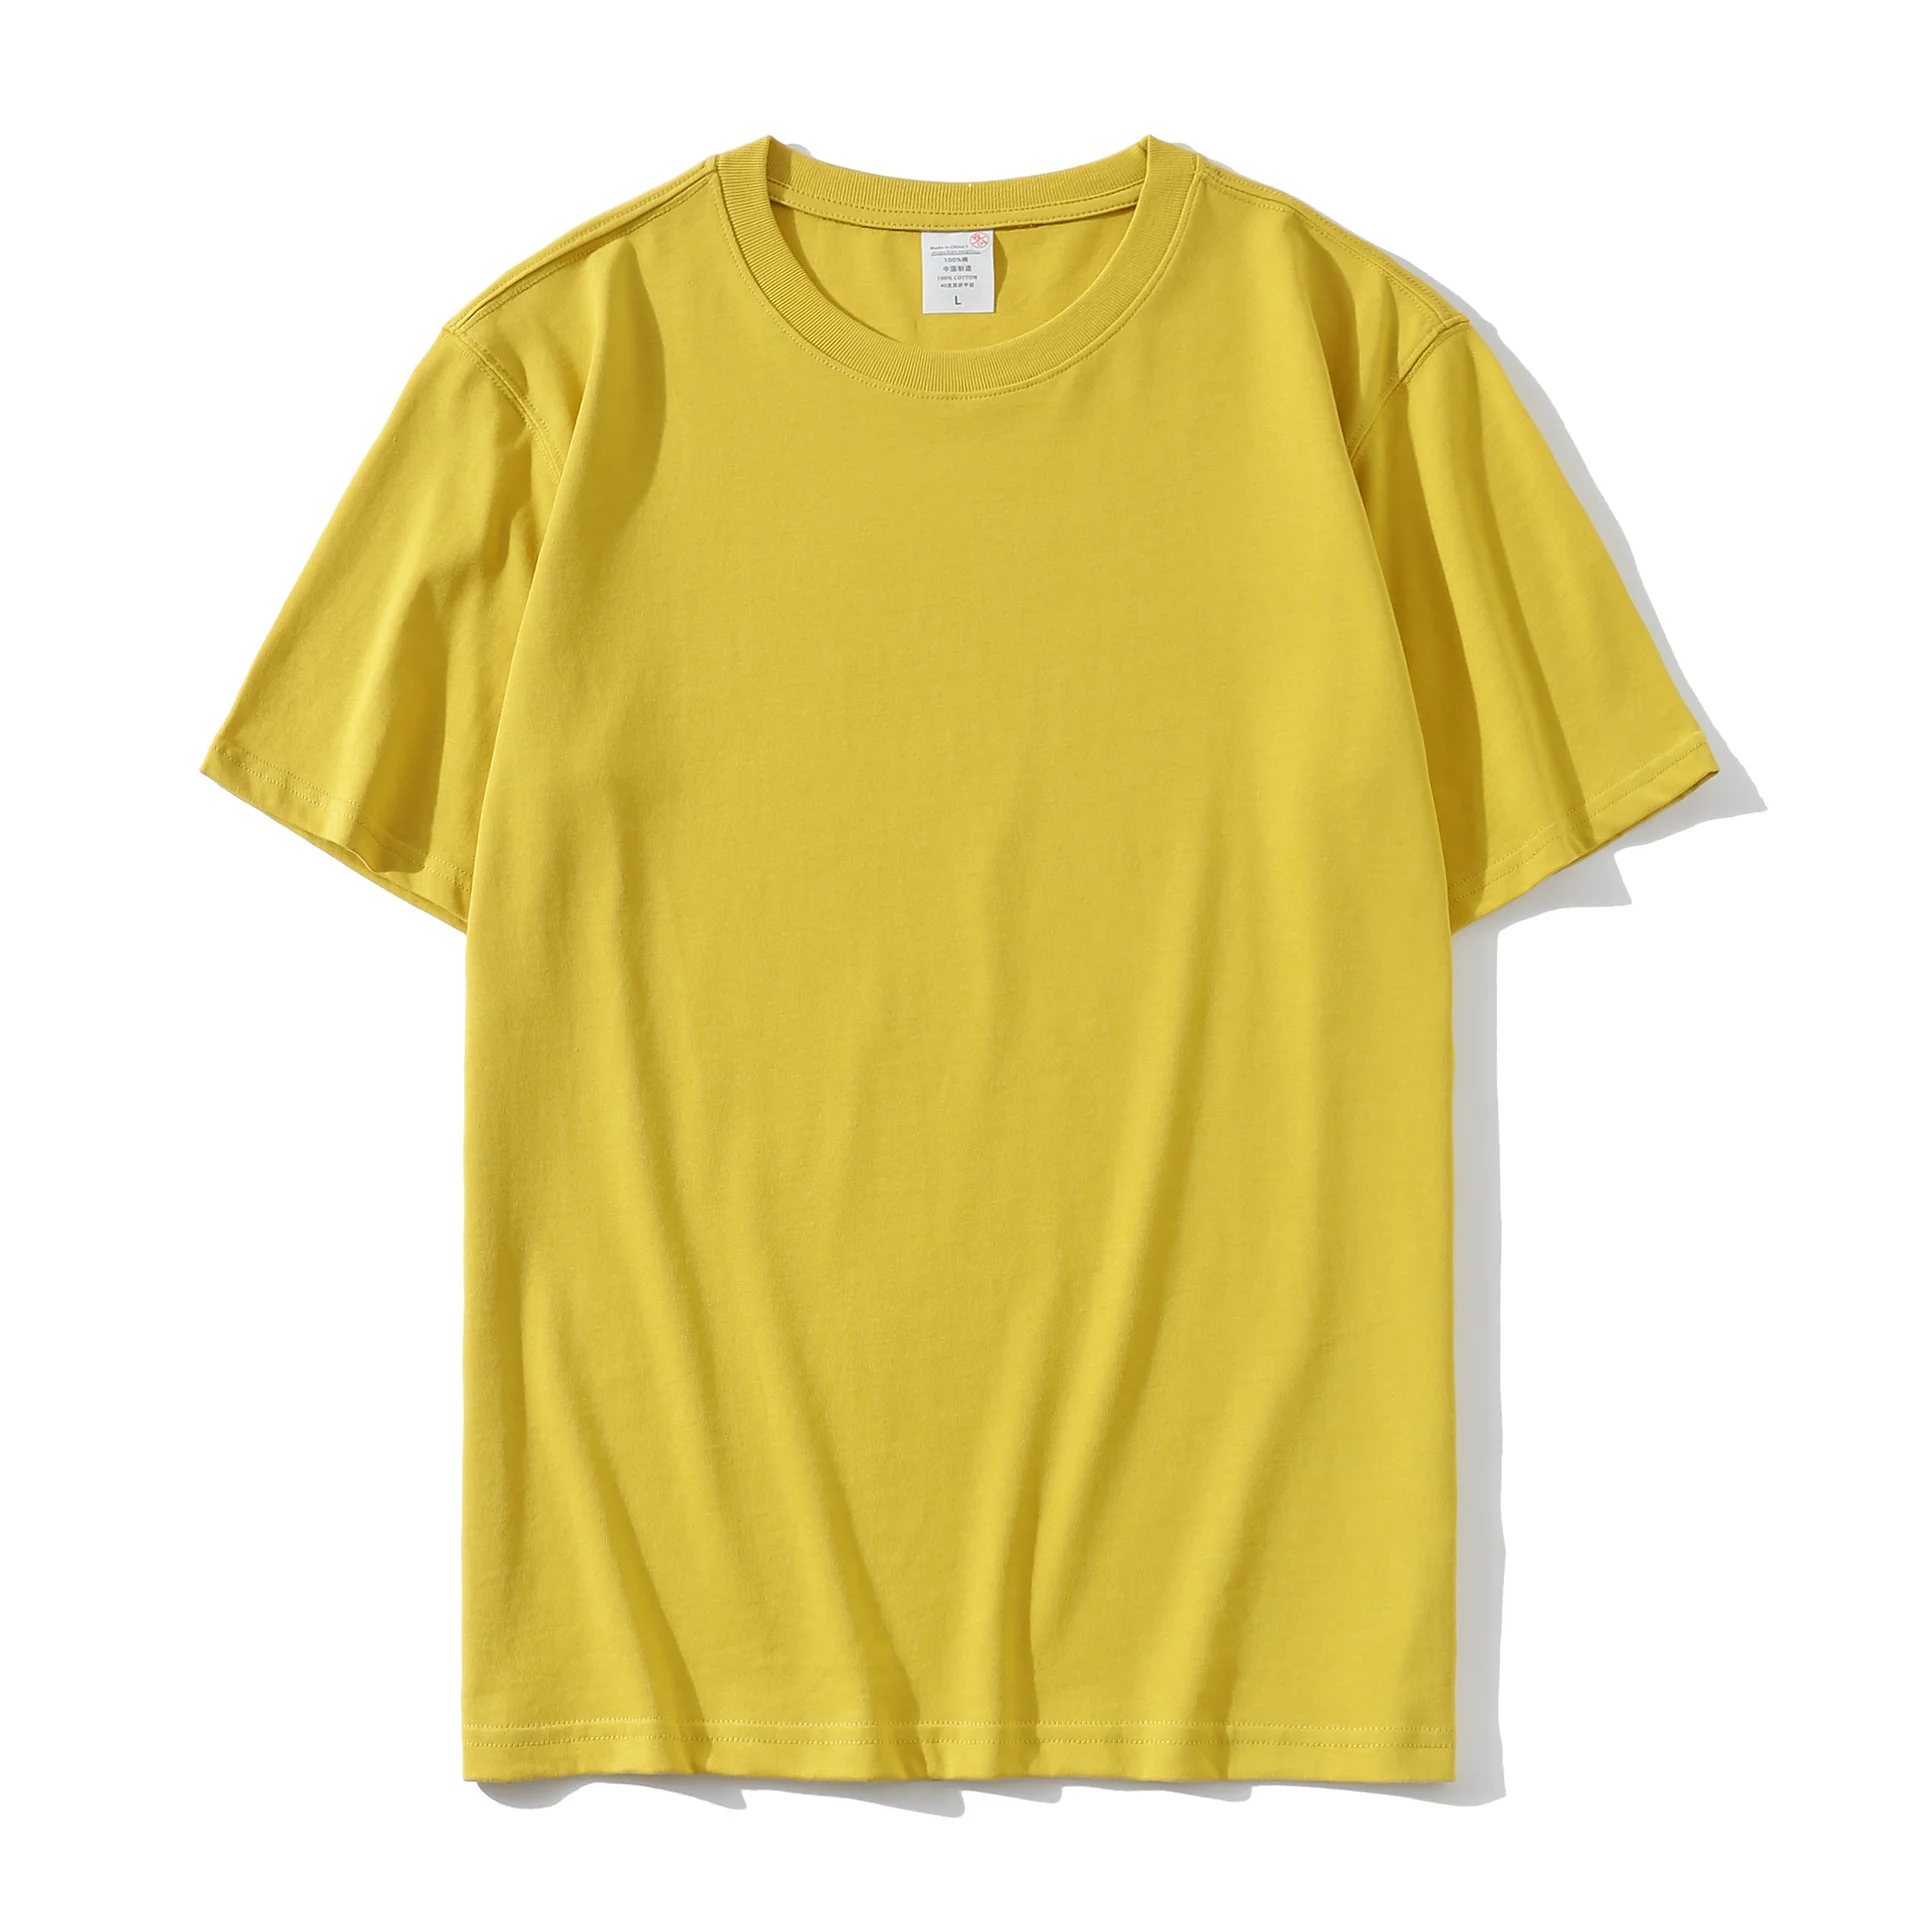 Wholesale Blank T shirts for Printing in Vietnam